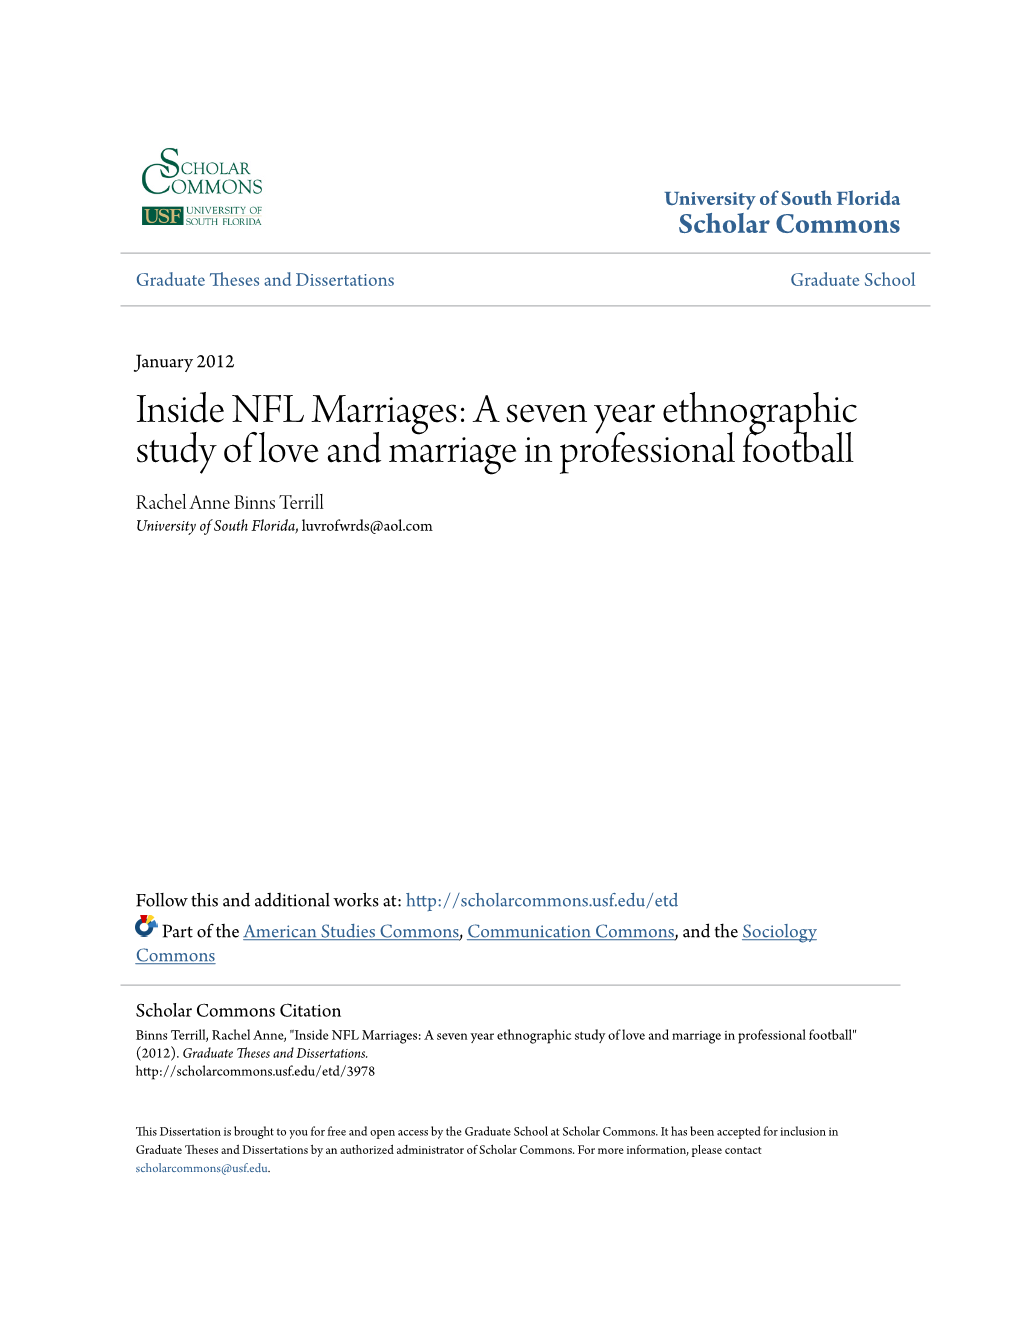 Inside NFL Marriages